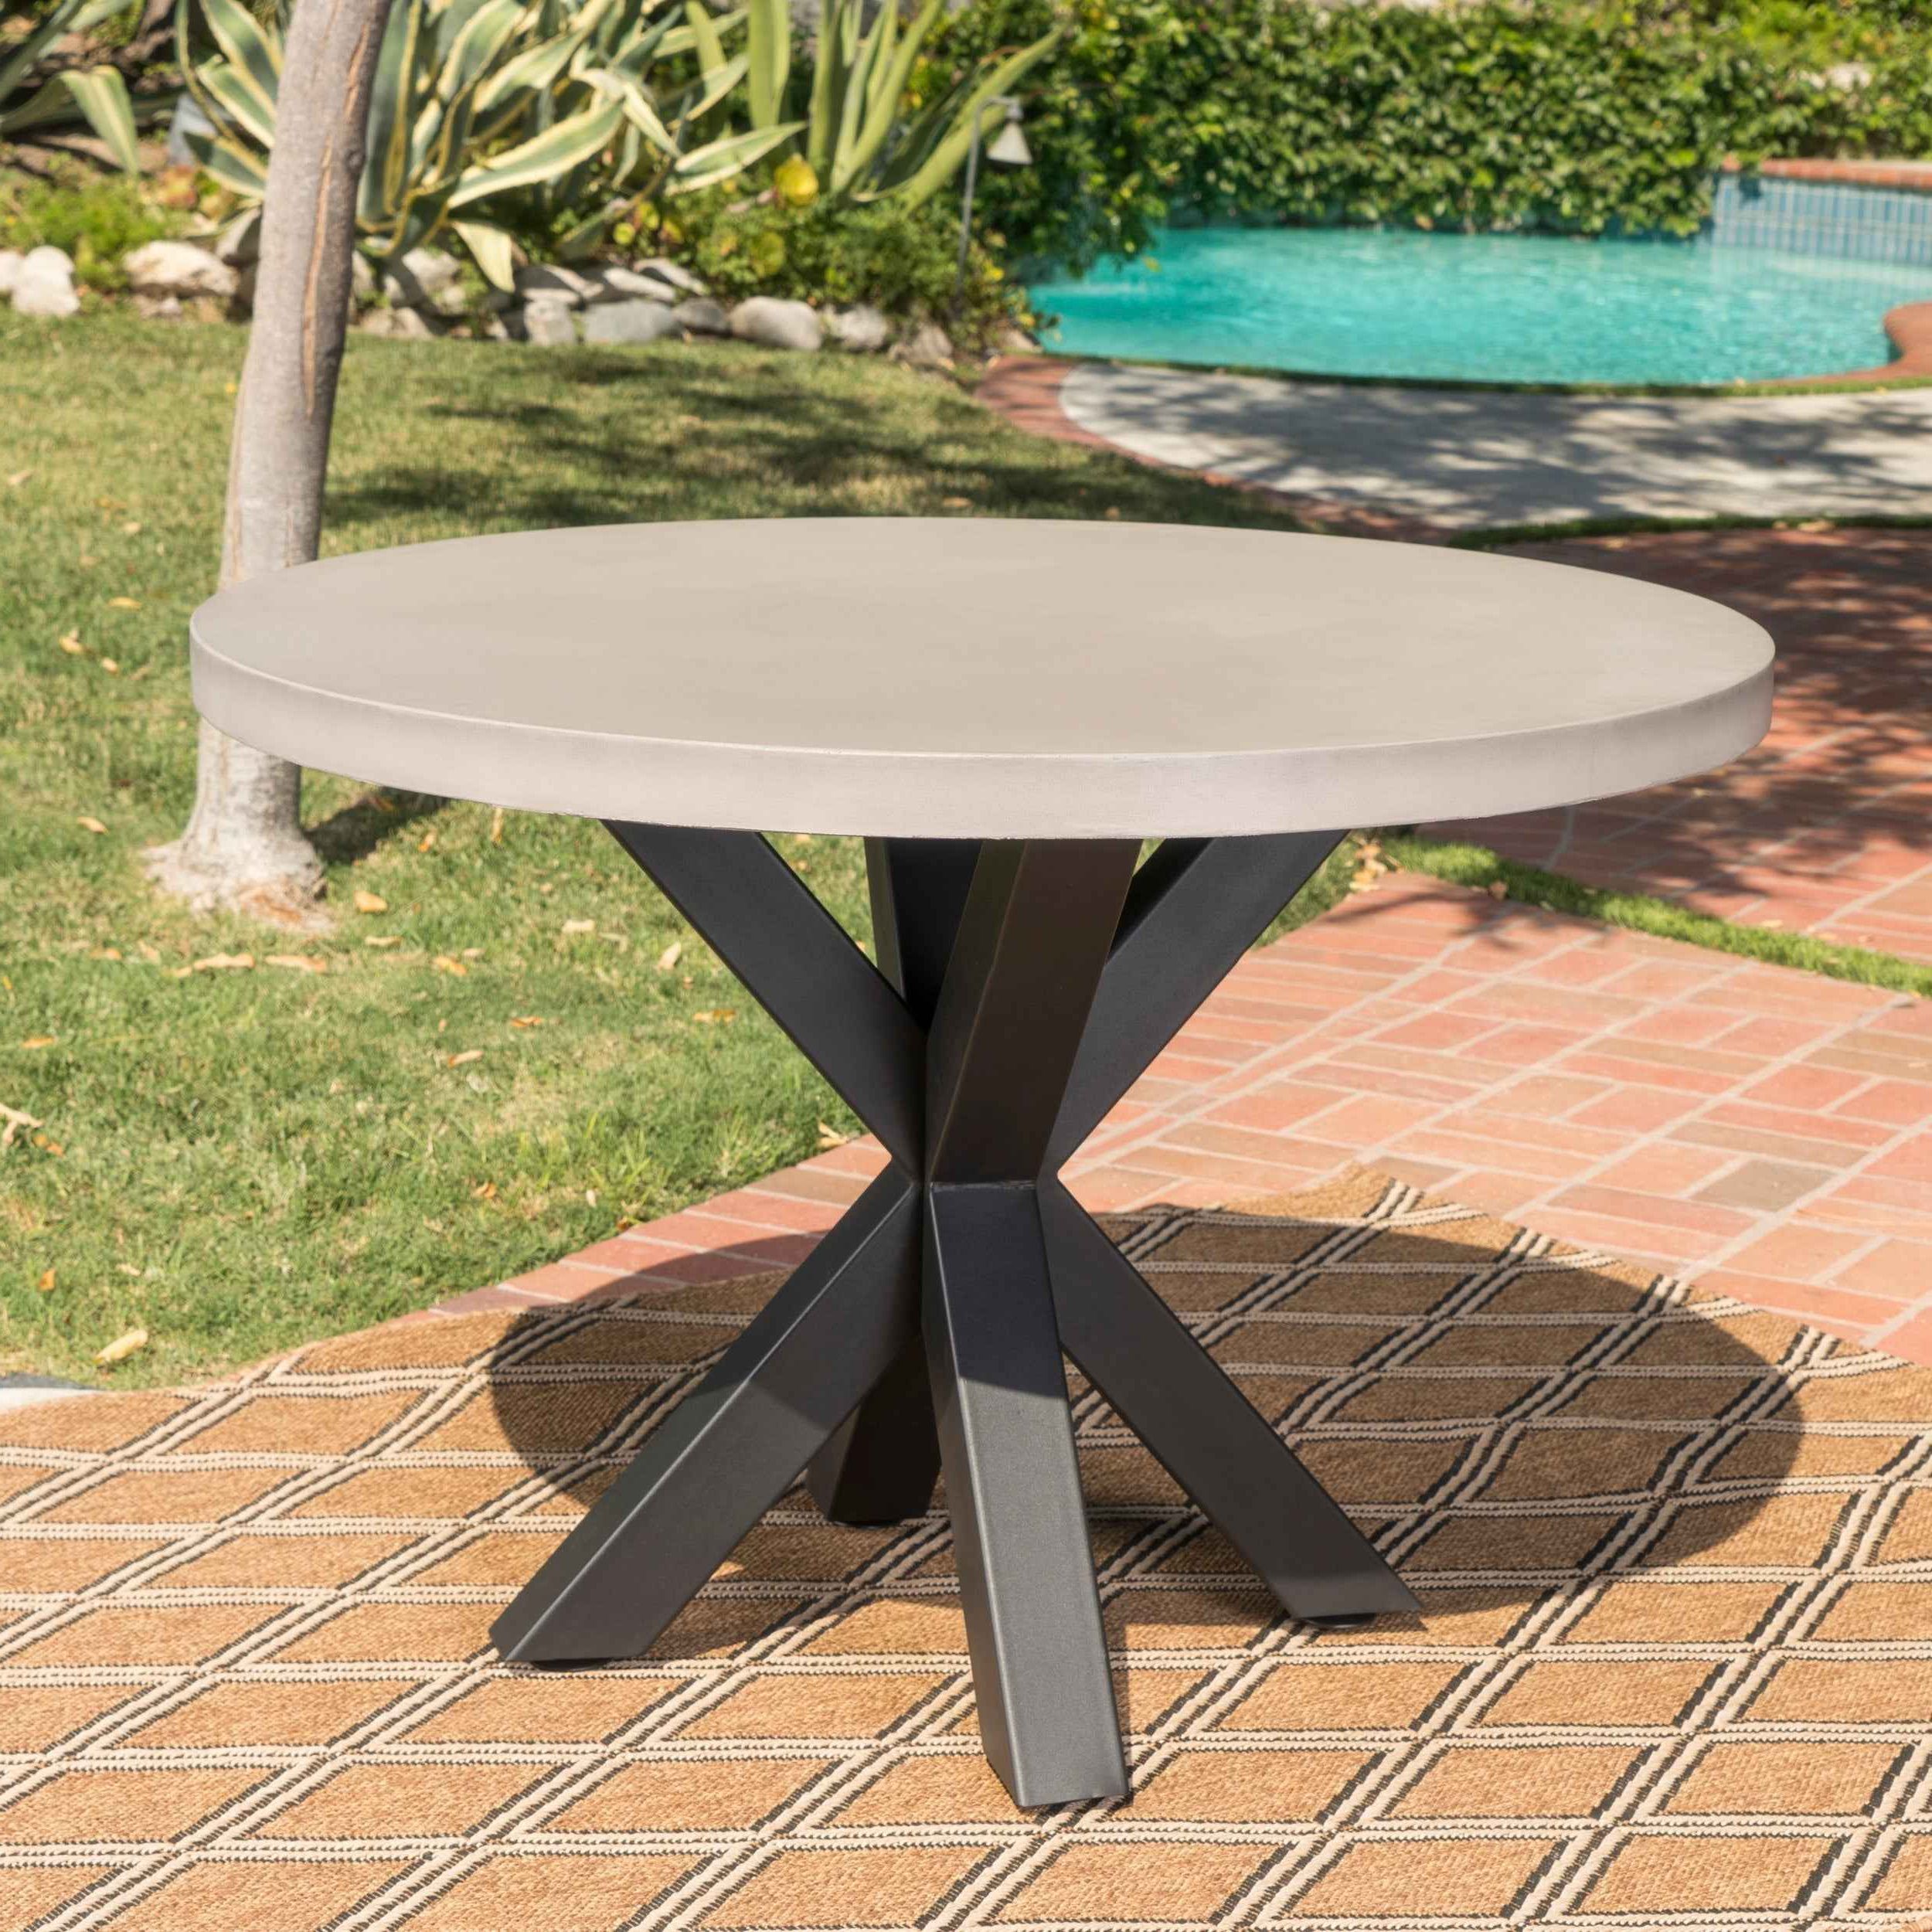 Oval Concrete Patio Table Outdoor Decorations Durable Pertaining To Popular Chapman Round Marble Dining Tables (View 10 of 25)